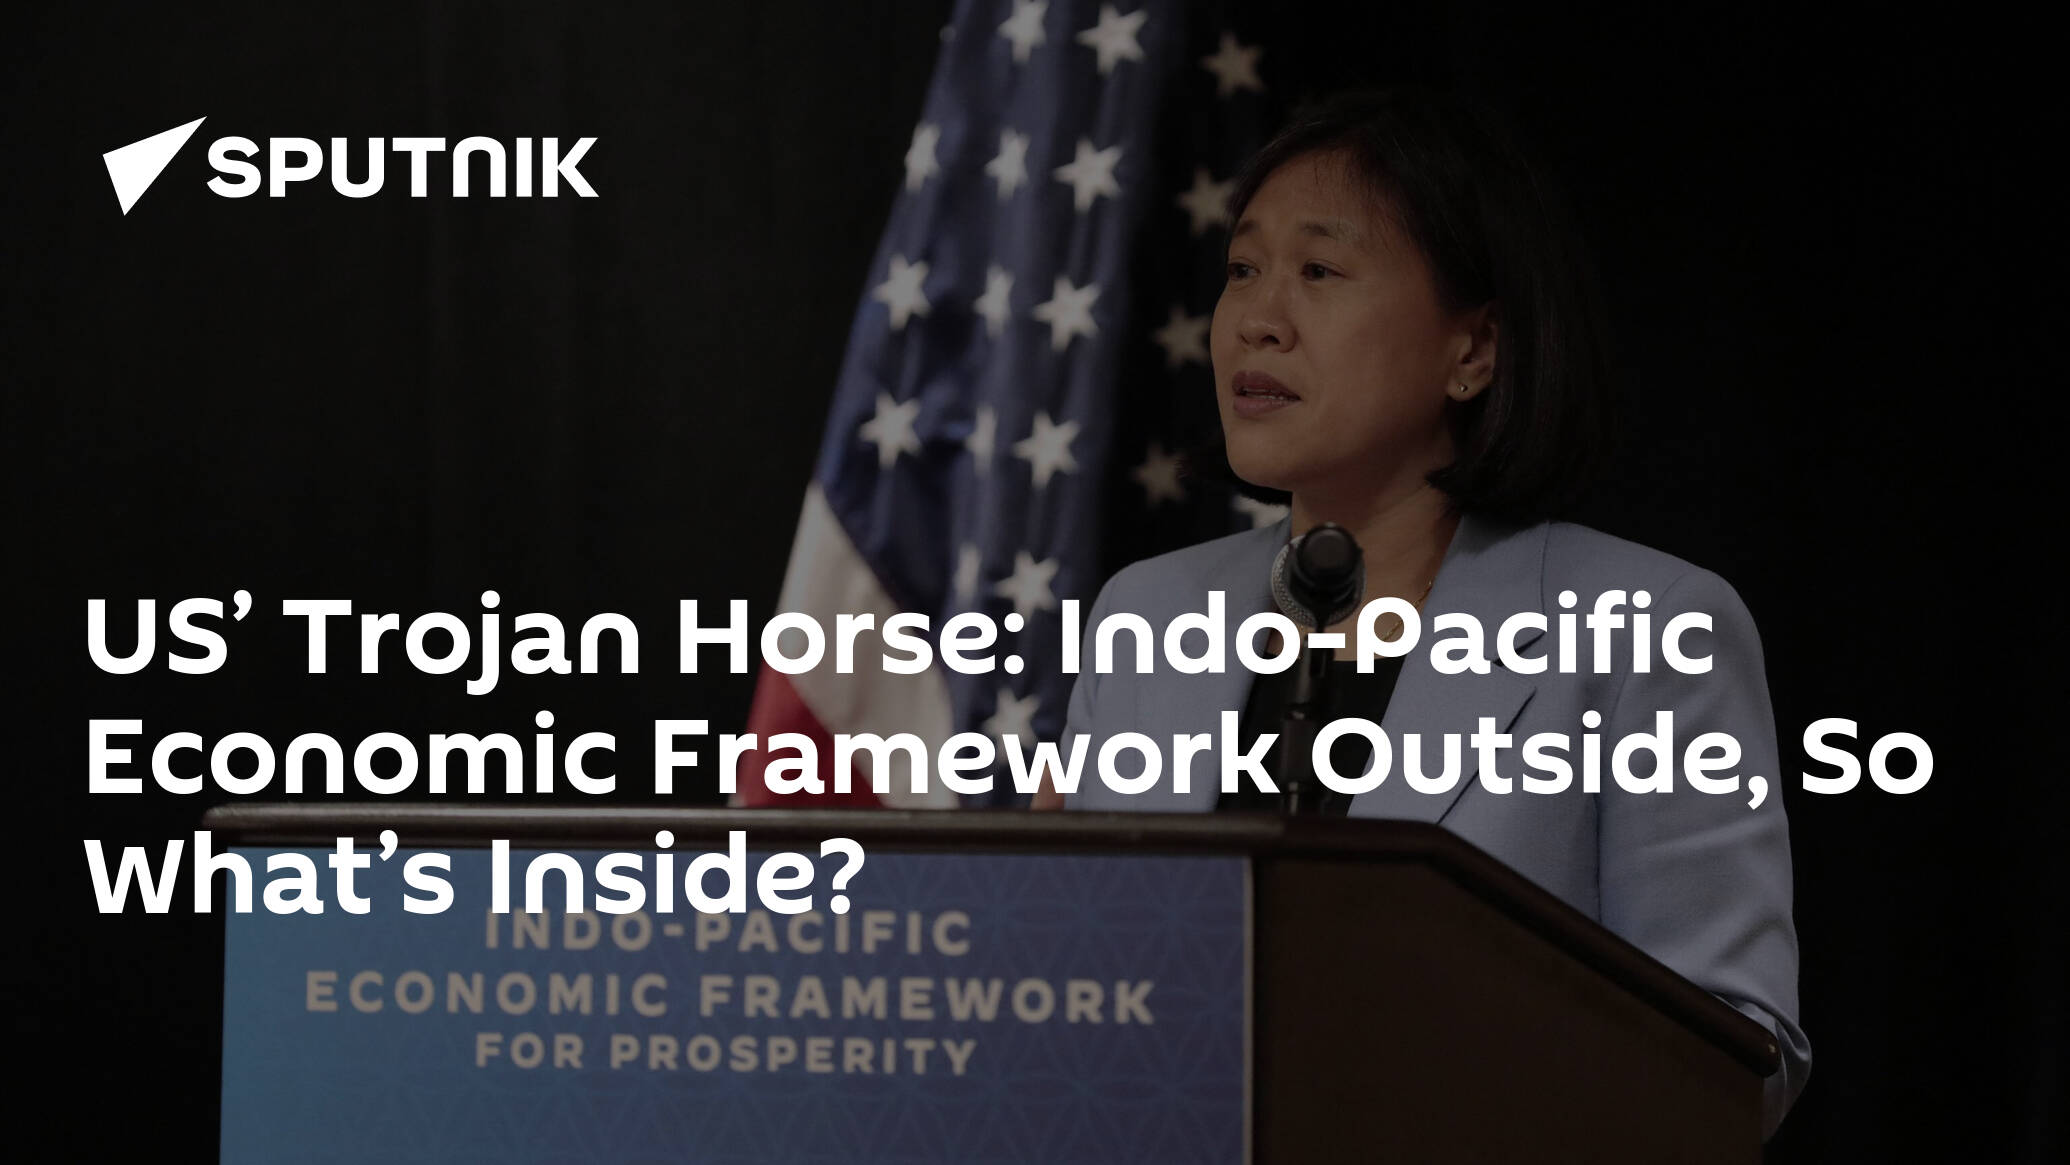 US’ Trojan Horse: Indo-Pacific Economic Framework Outside, So What’s Inside?